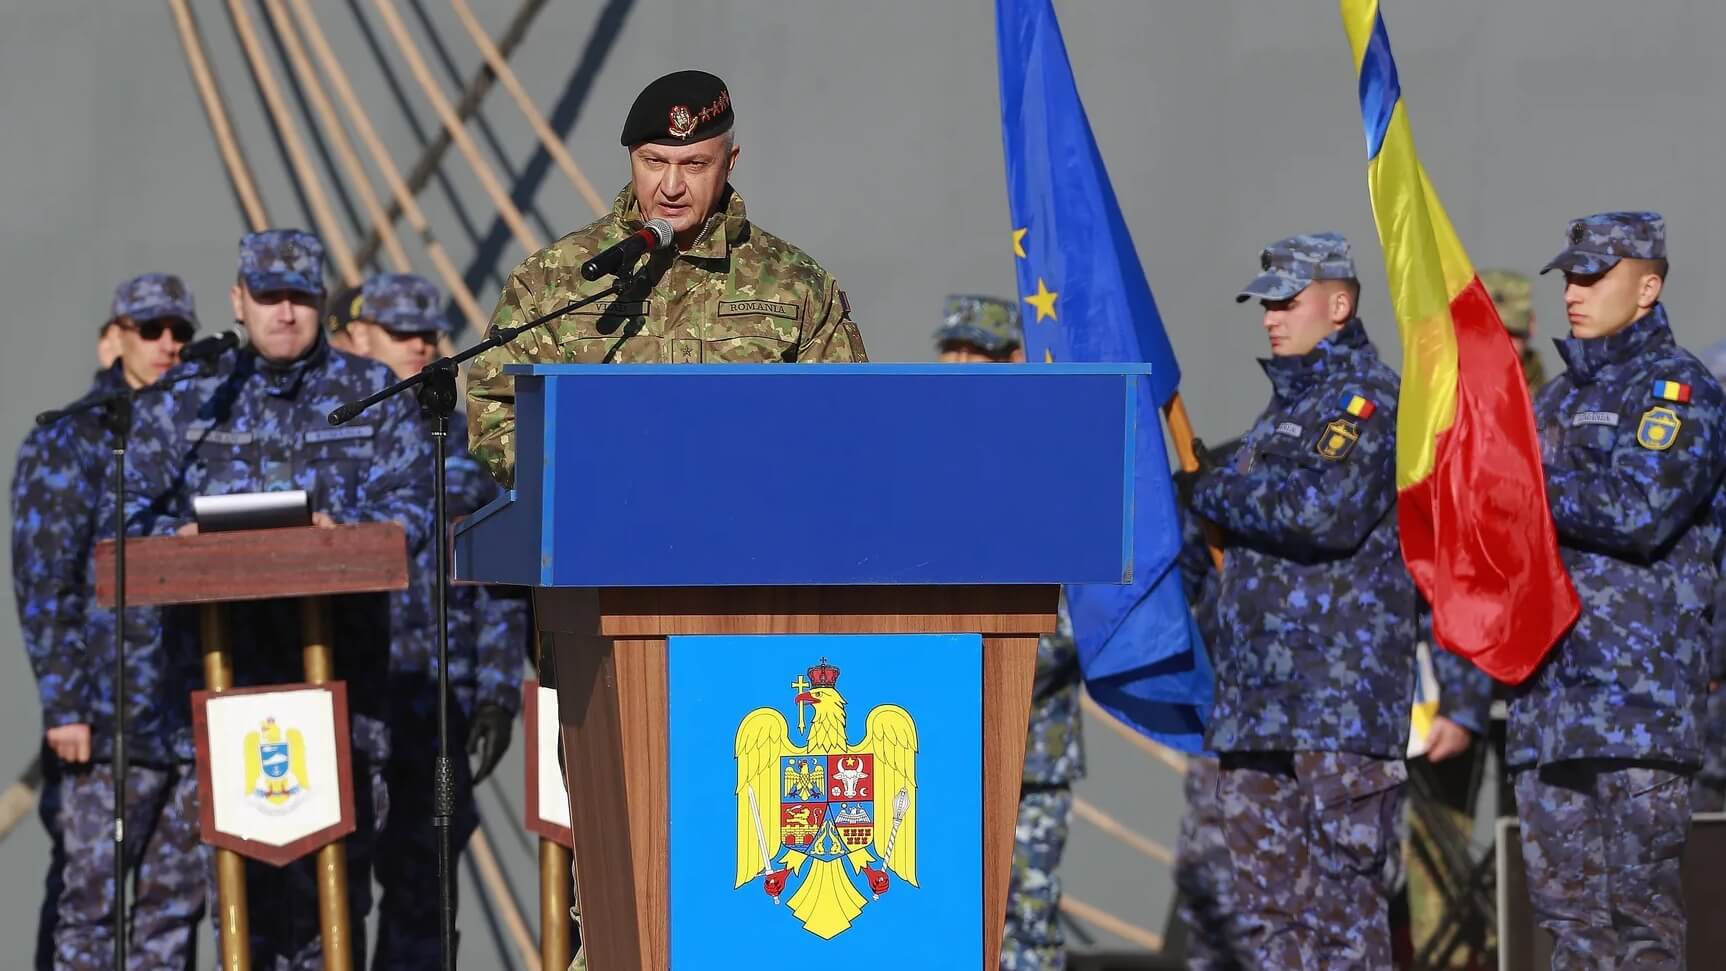 He wont stop in Ukraine. The head of the Romanian army calls for preparations for war with Putin